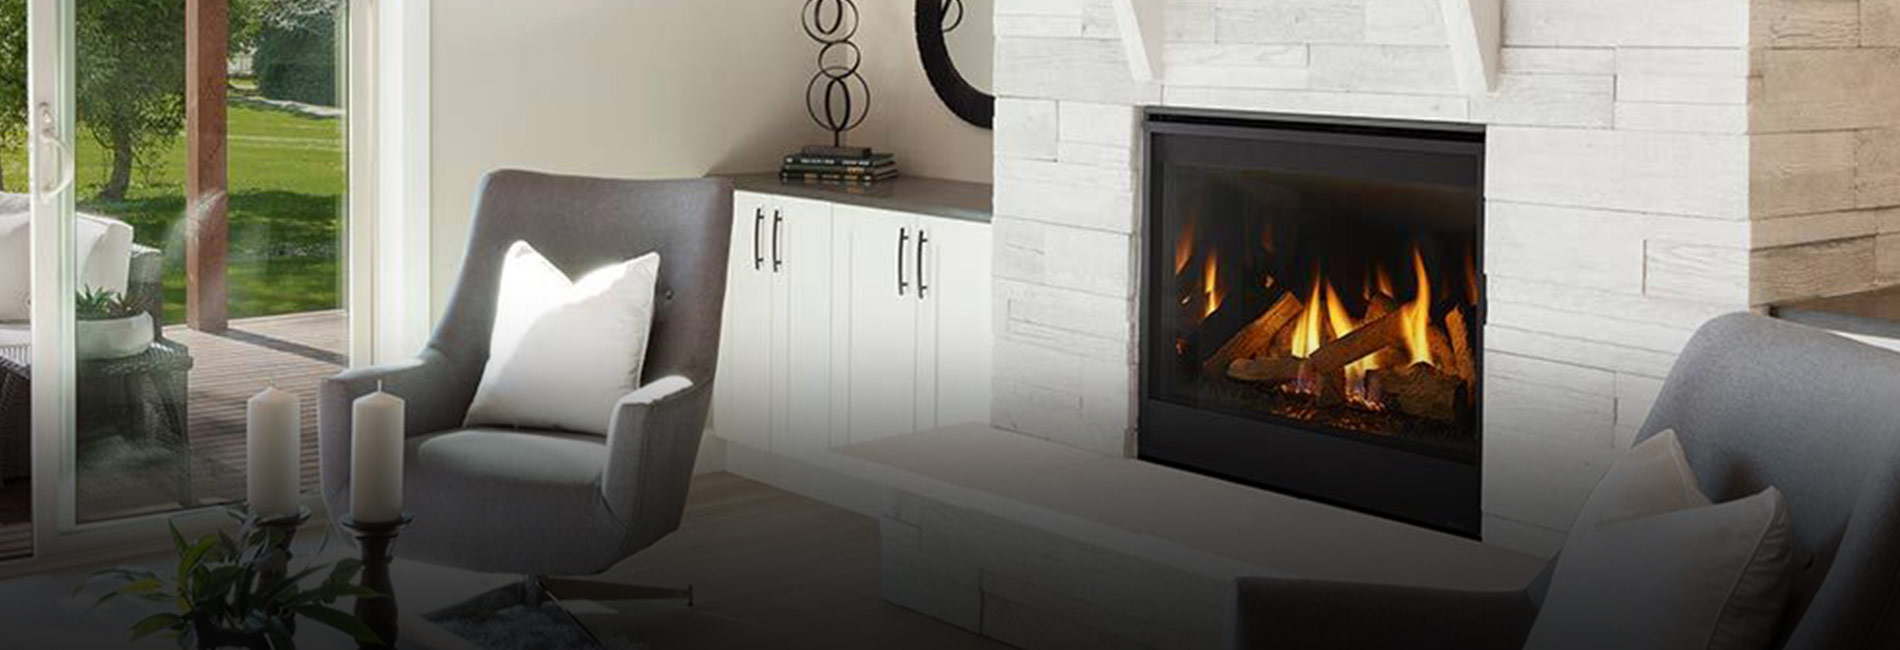 Majestic Ruby Series Direct Vent Gas Fireplace Insert - All American Chimney